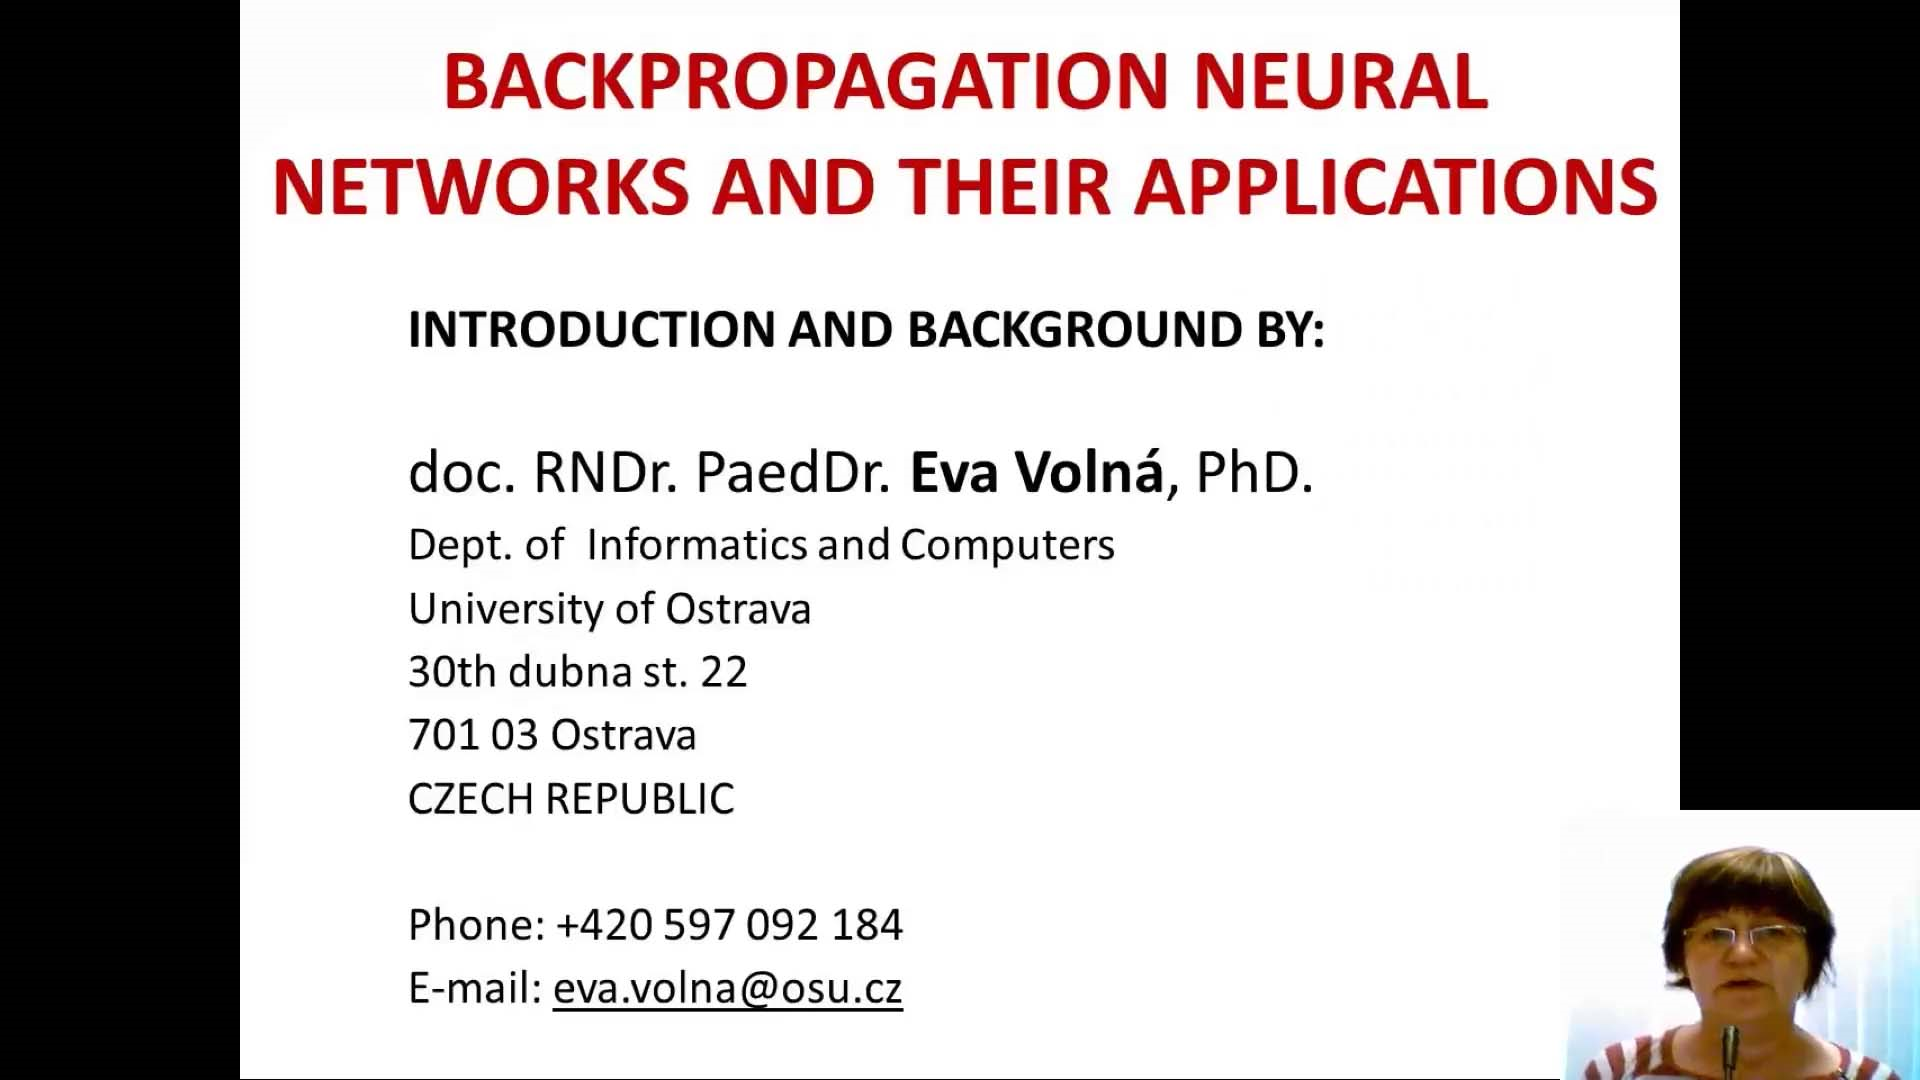 Backpropagation Neural Networks and Their Applications